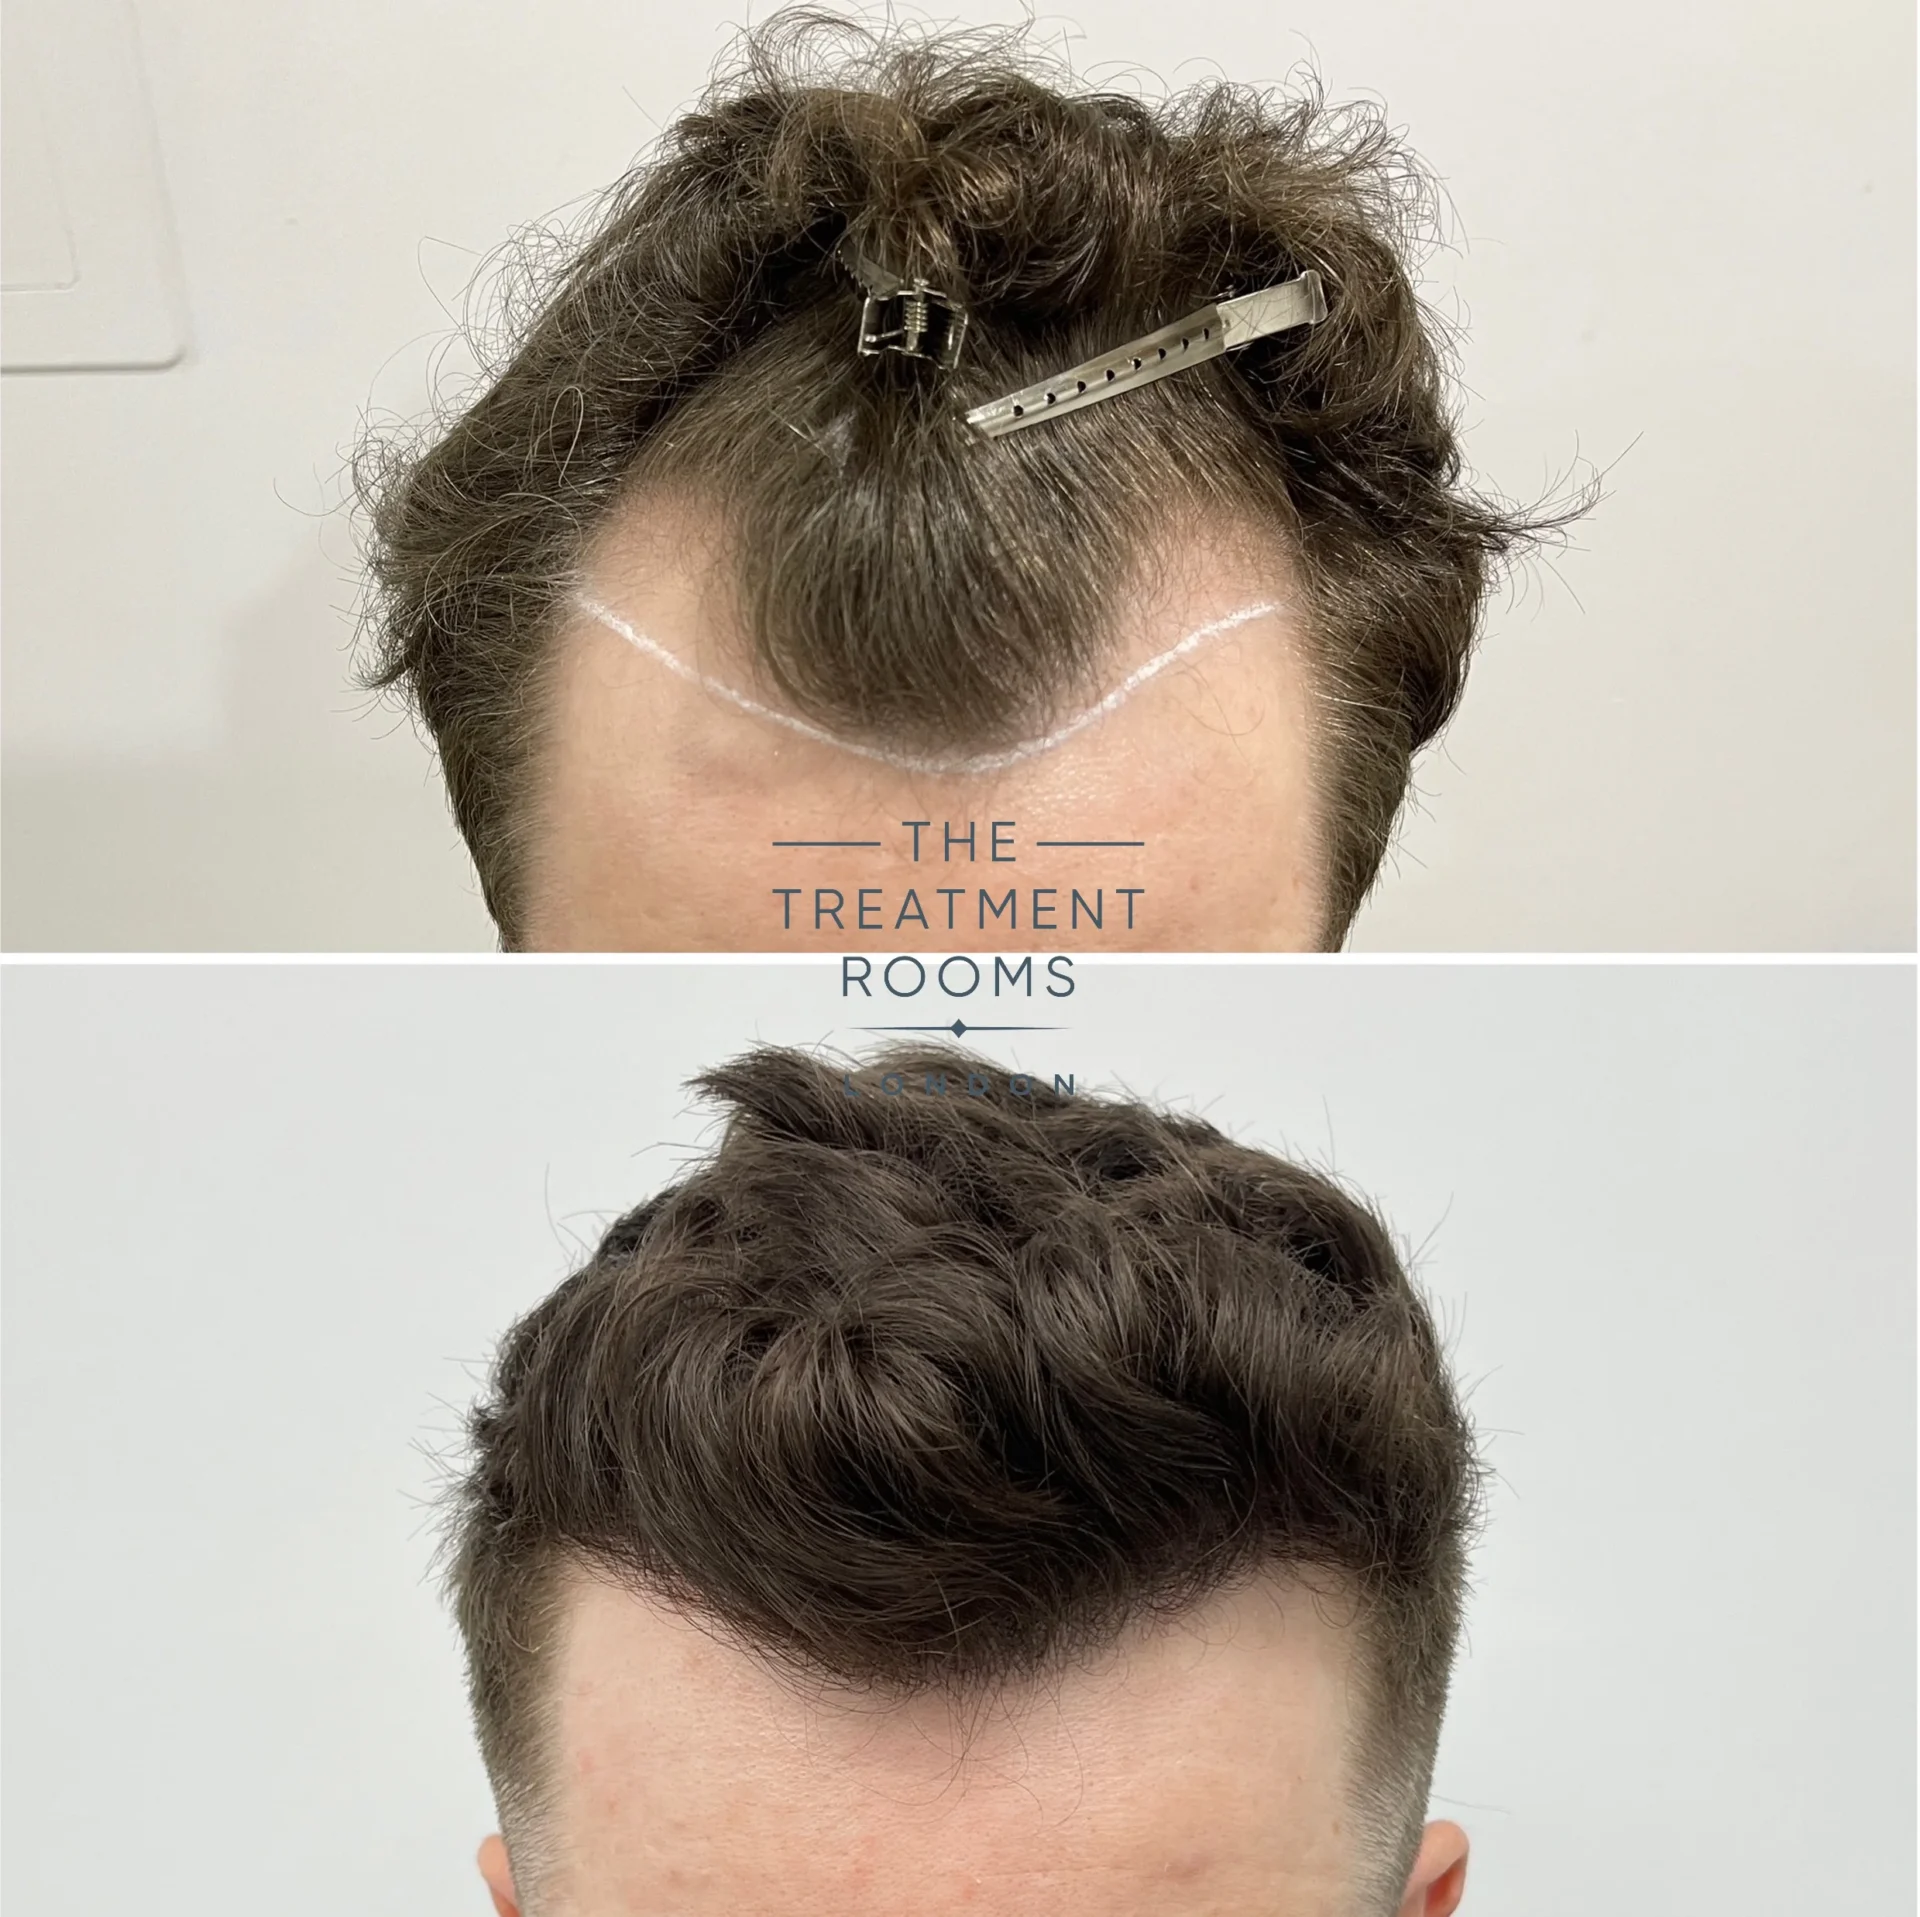 widow's peak and temple recession hair transplant before and after